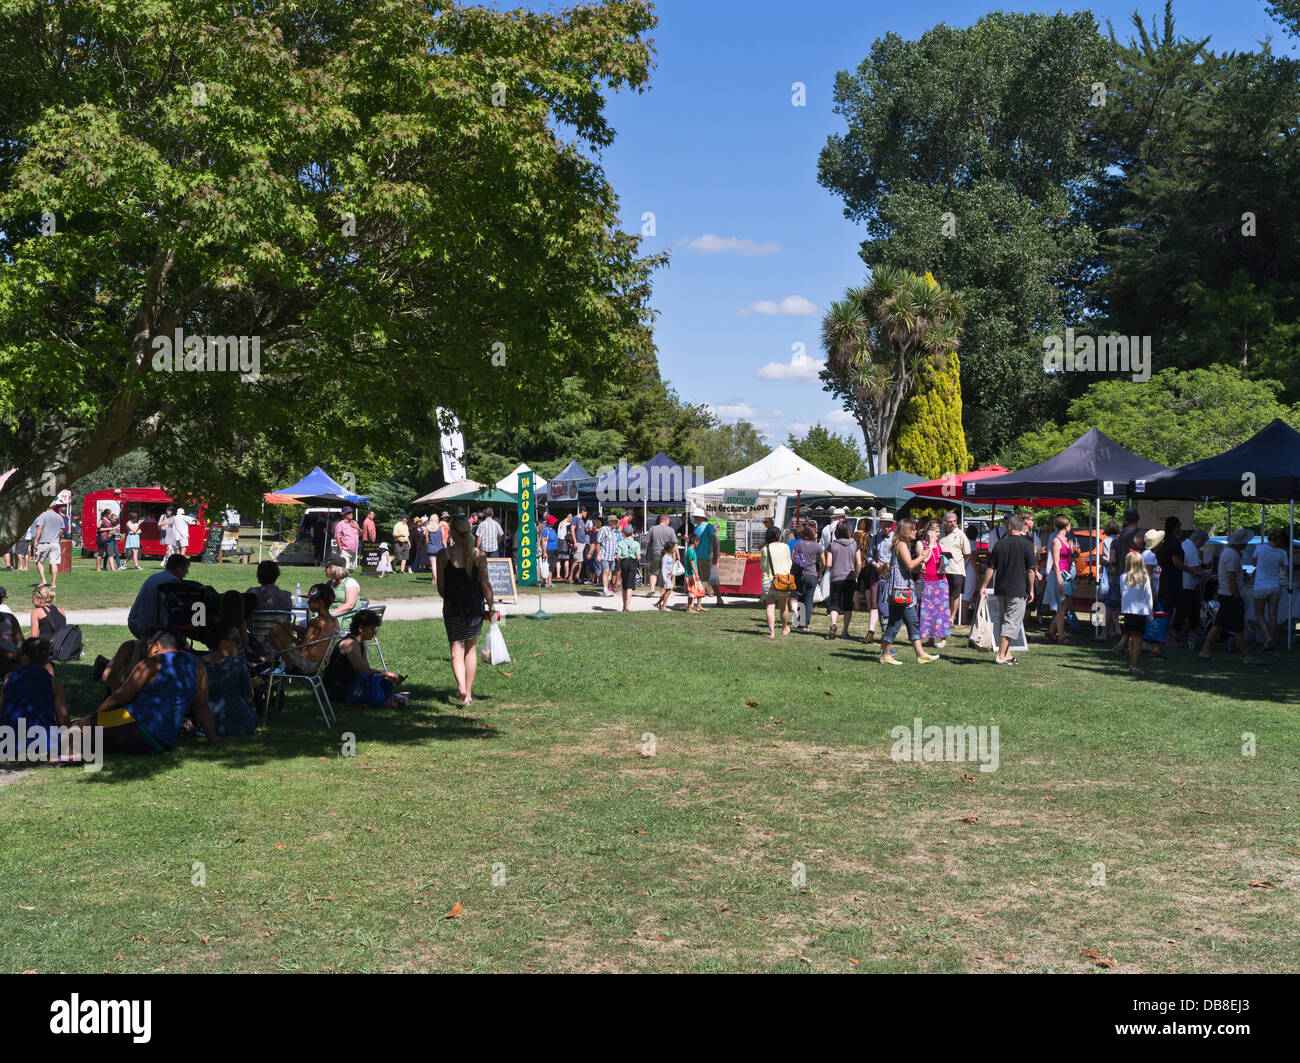 dh Farmers Sunday Market HASTINGS NEW ZEALAND People relaxing under tree customers shopping stalls north island hawkes bay Stock Photo